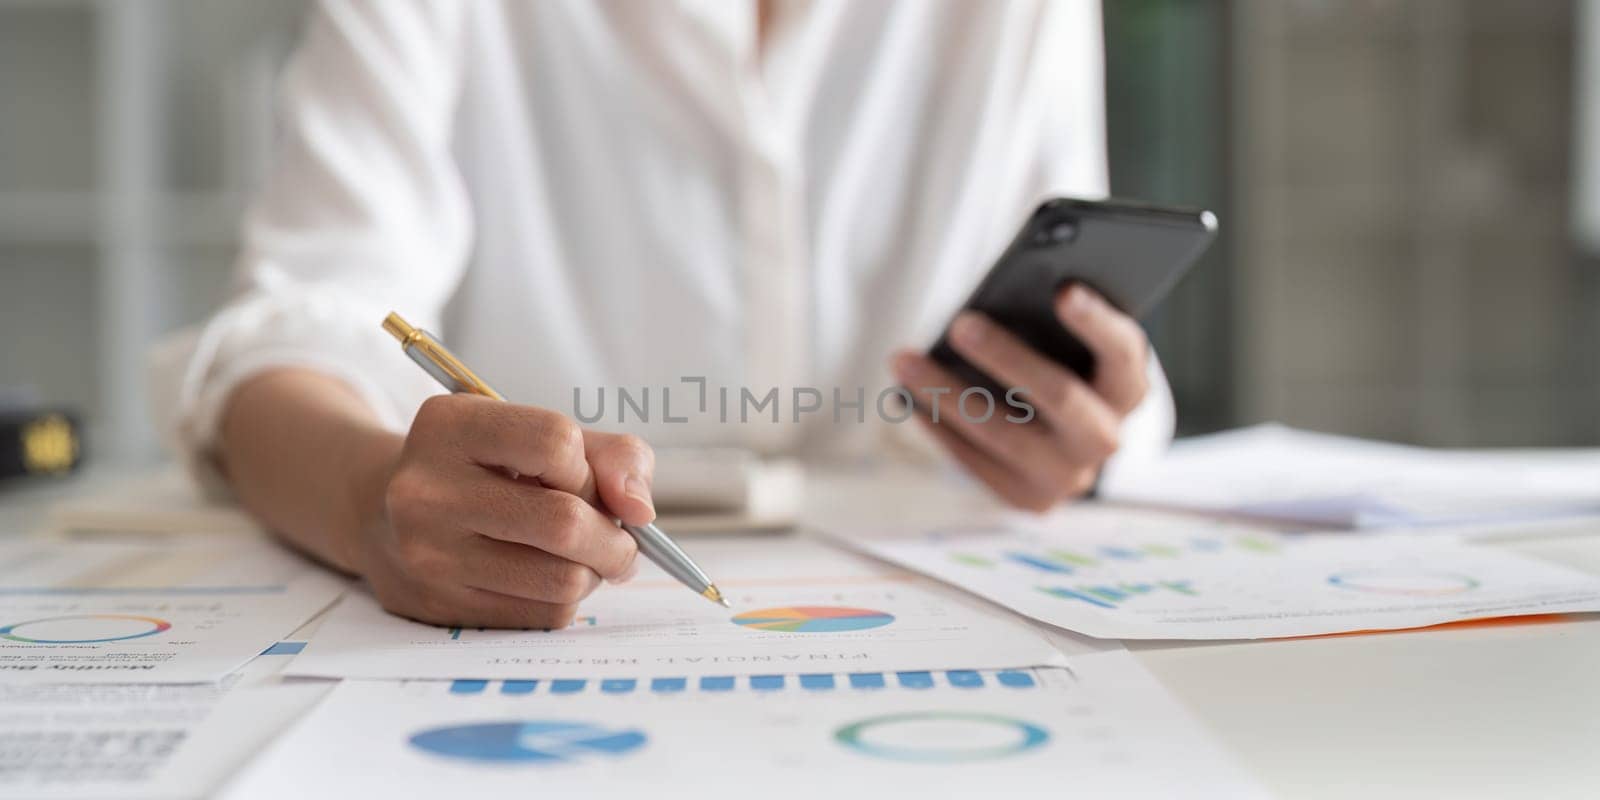 Accountant using mobile phone at office, analyzing business document with graph. Financial chart, marketing report. Accounting data analysis concept by nateemee